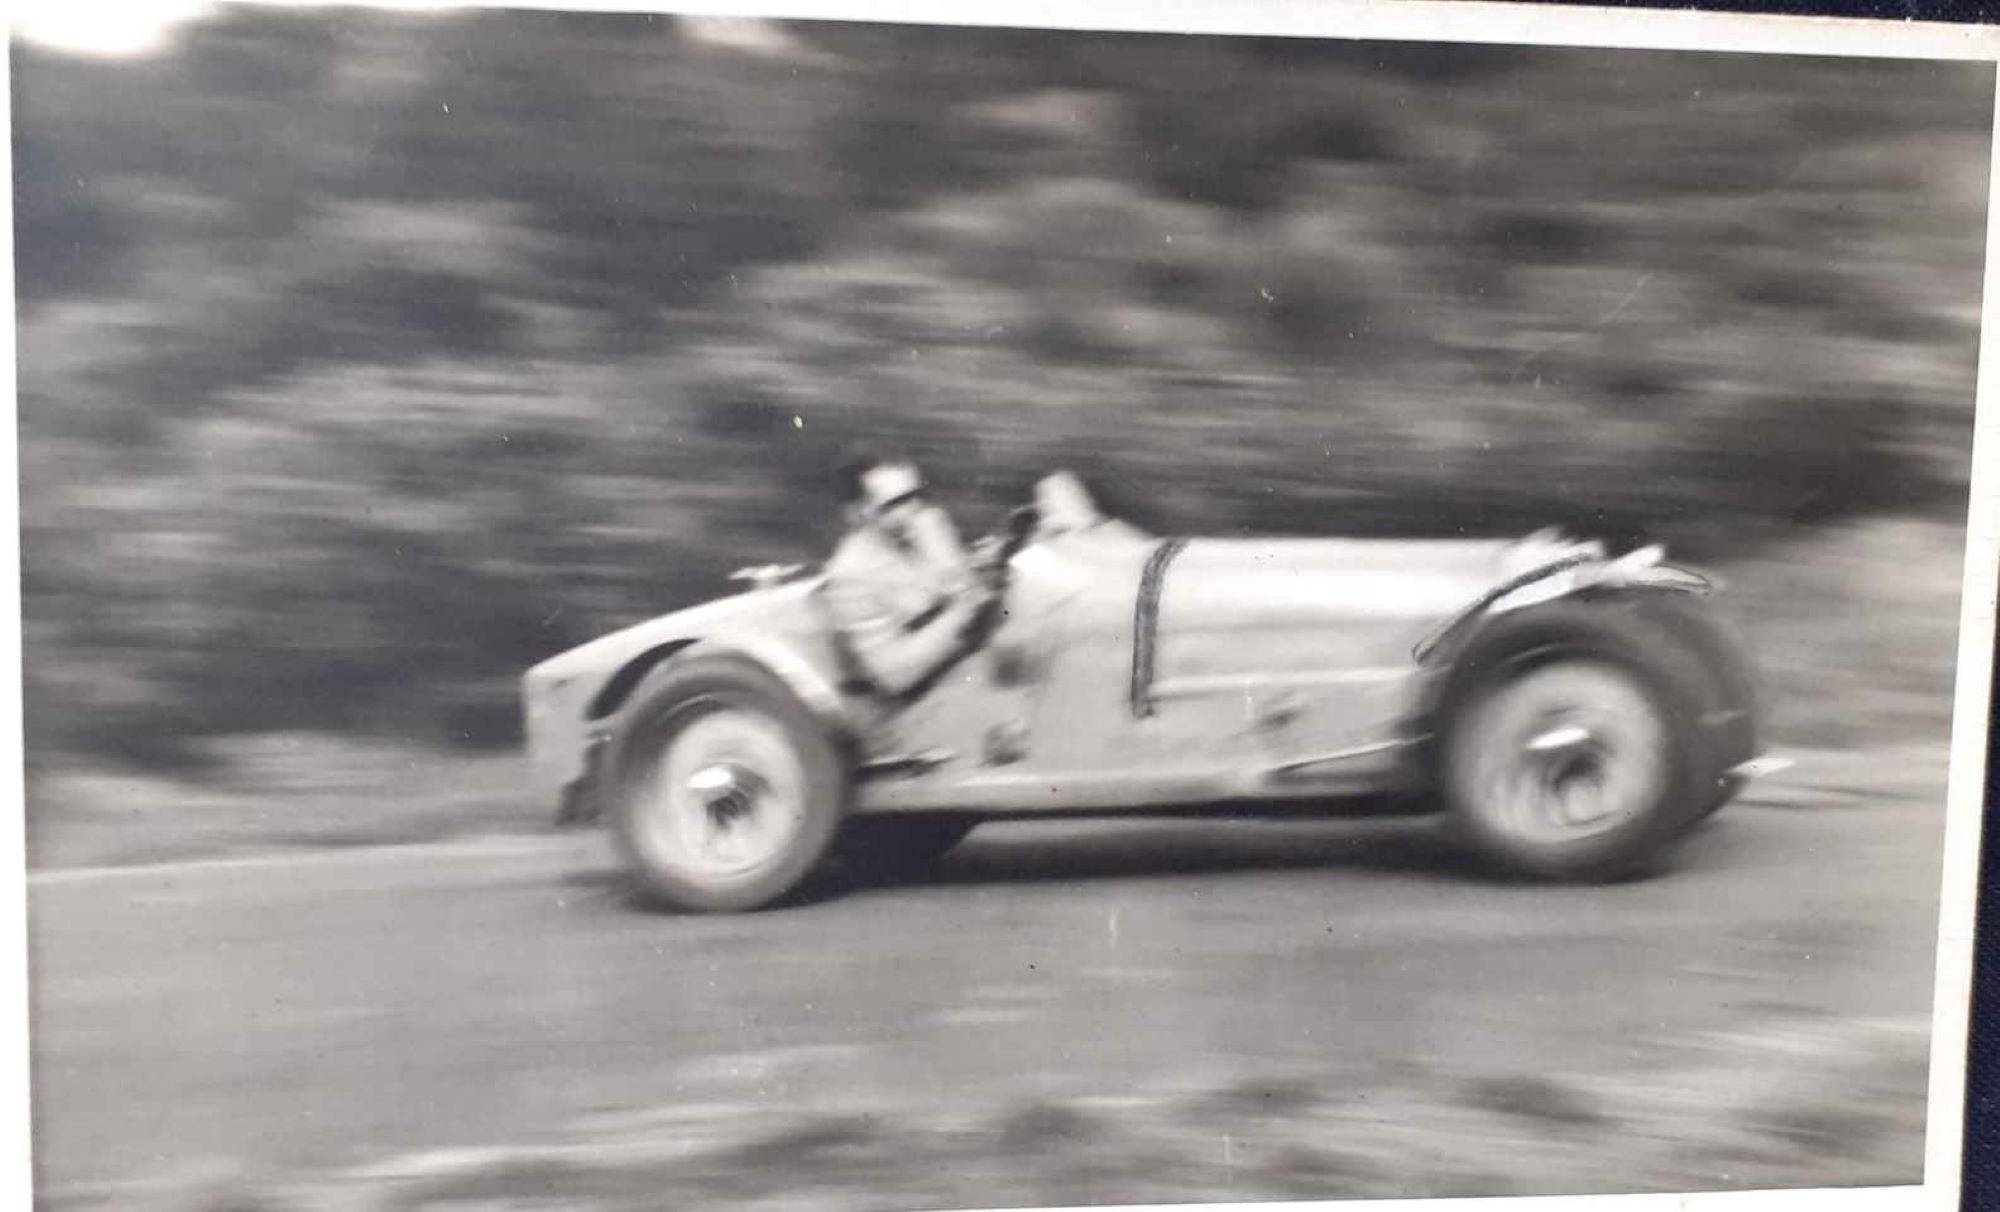 Name:  NSCC 1950 #0116 Bugatti T35 at speed - light colour 1950's - image Graeme Wells arch Anthony Wel.jpg
Views: 199
Size:  158.1 KB